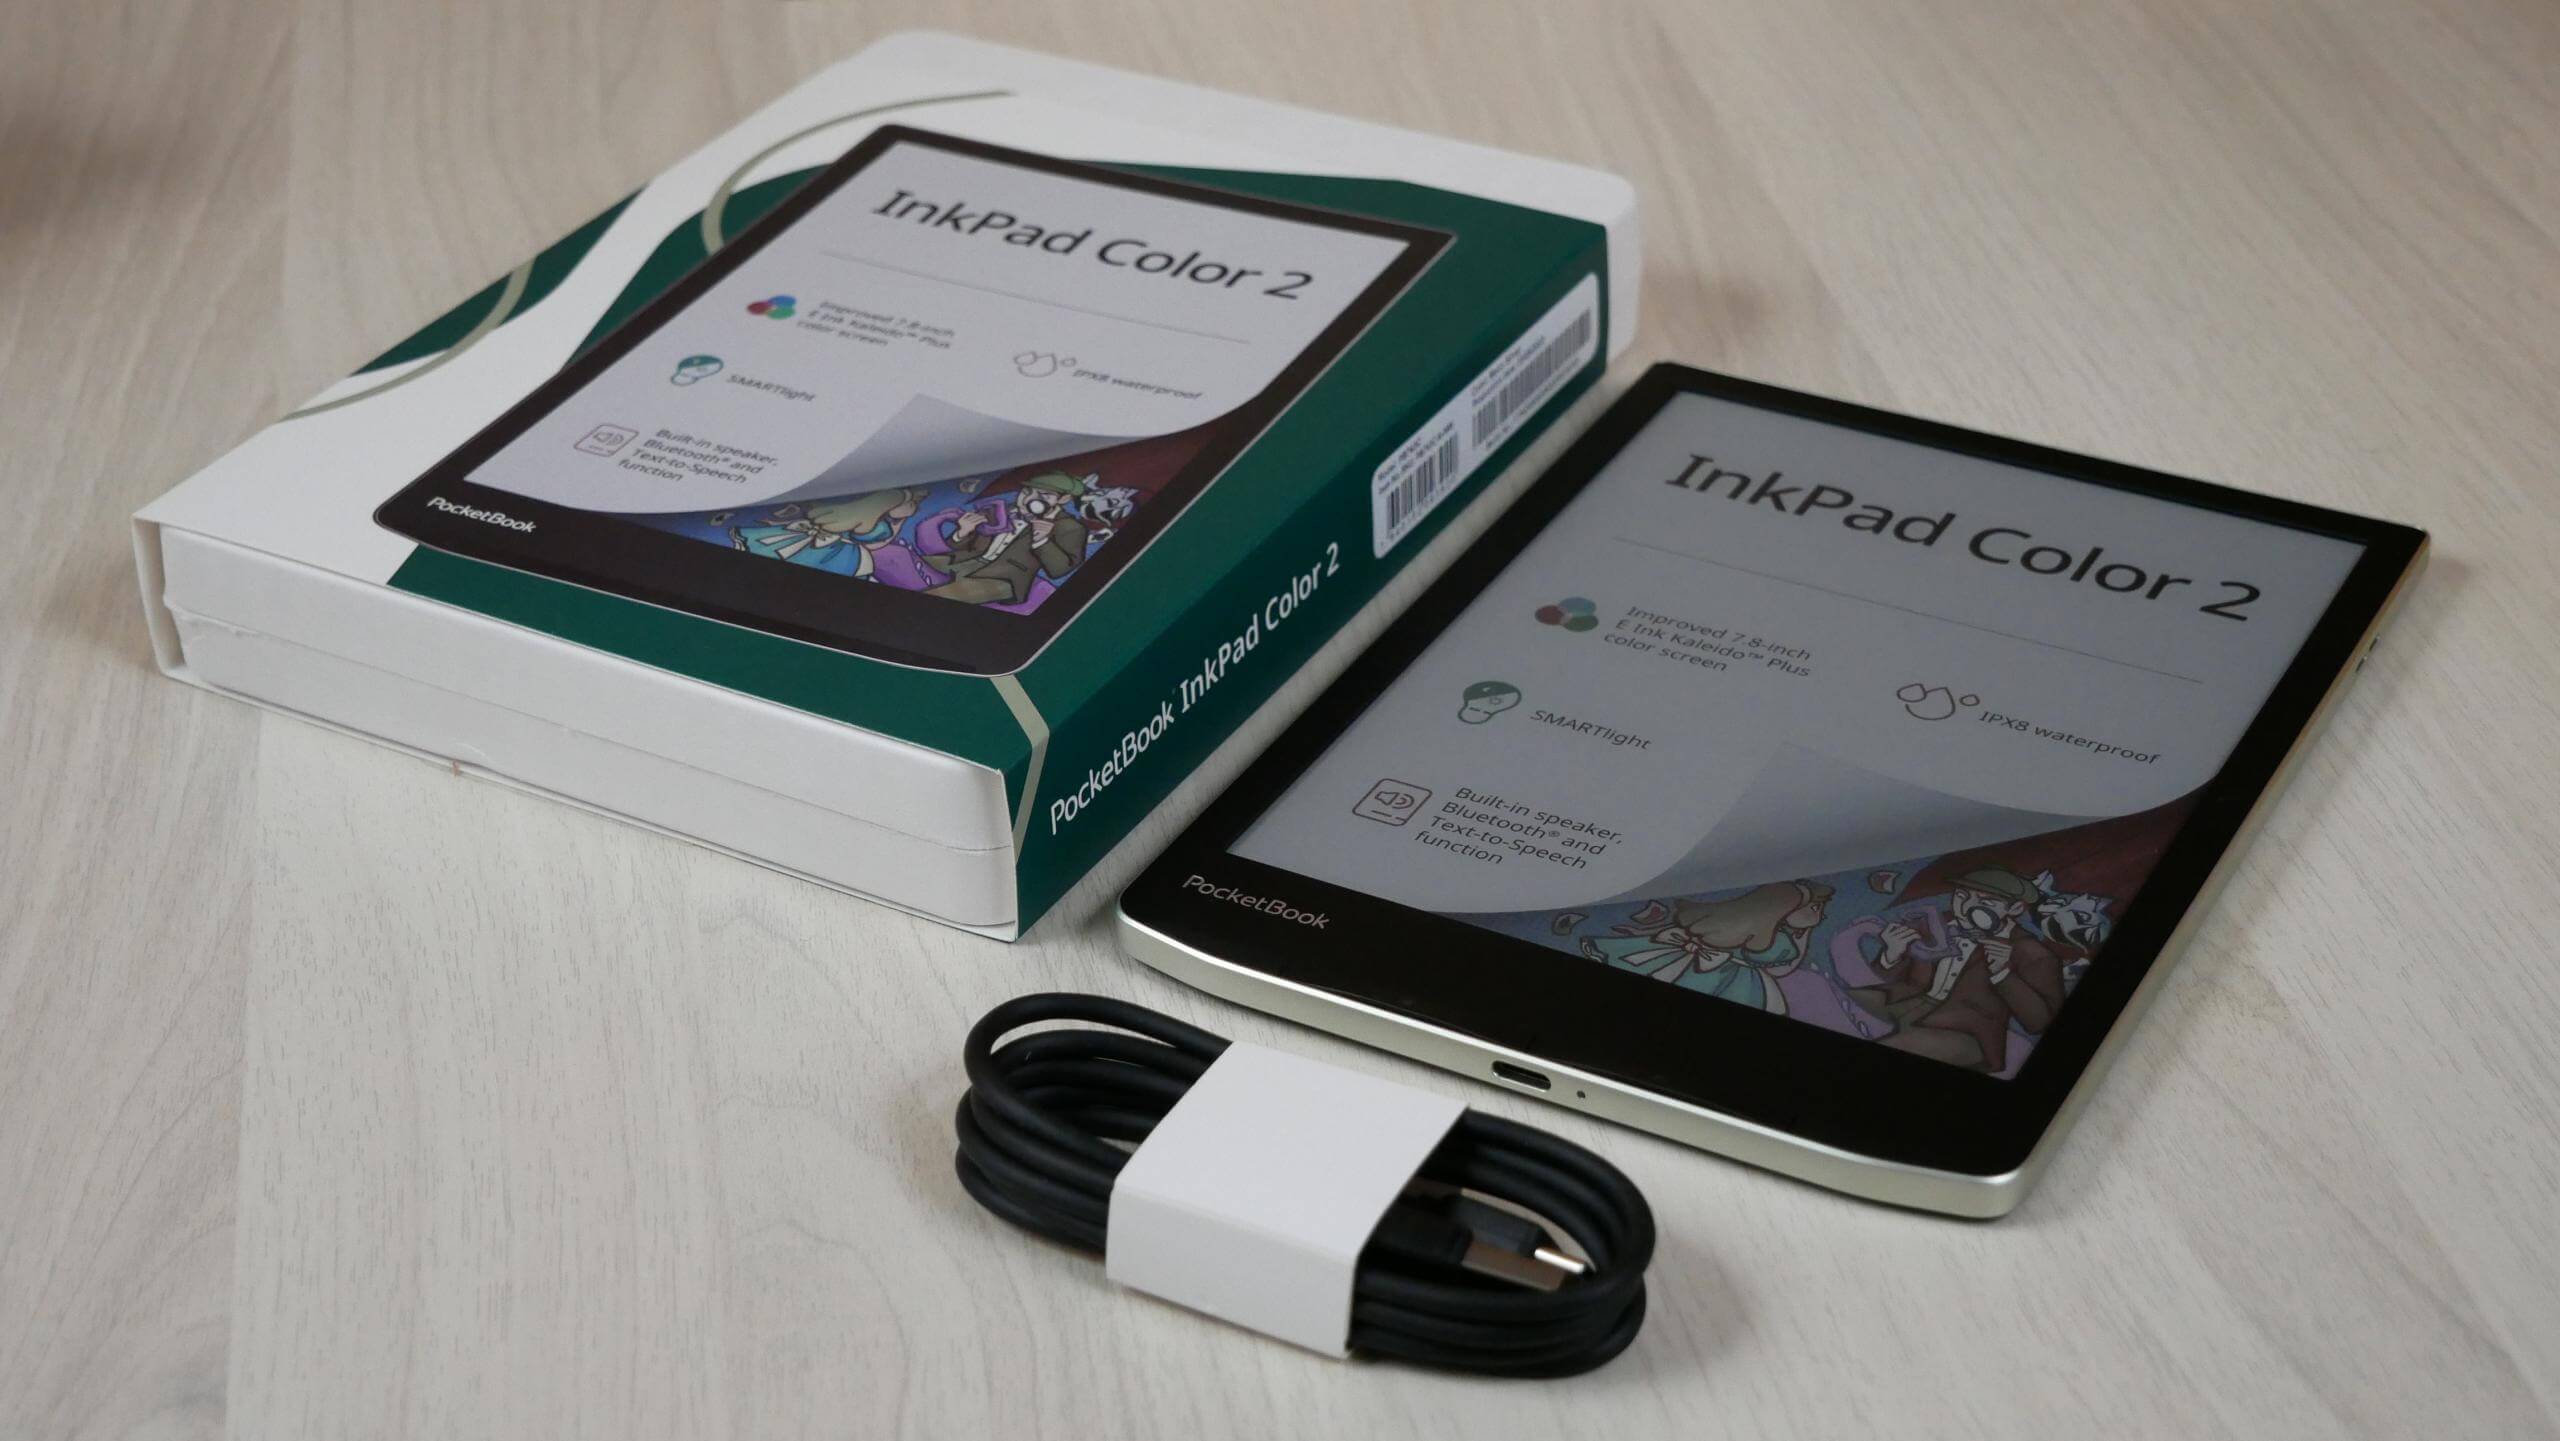 First look at 2 e-Reader Color e-Reader InkPad - the Good Pocketbook